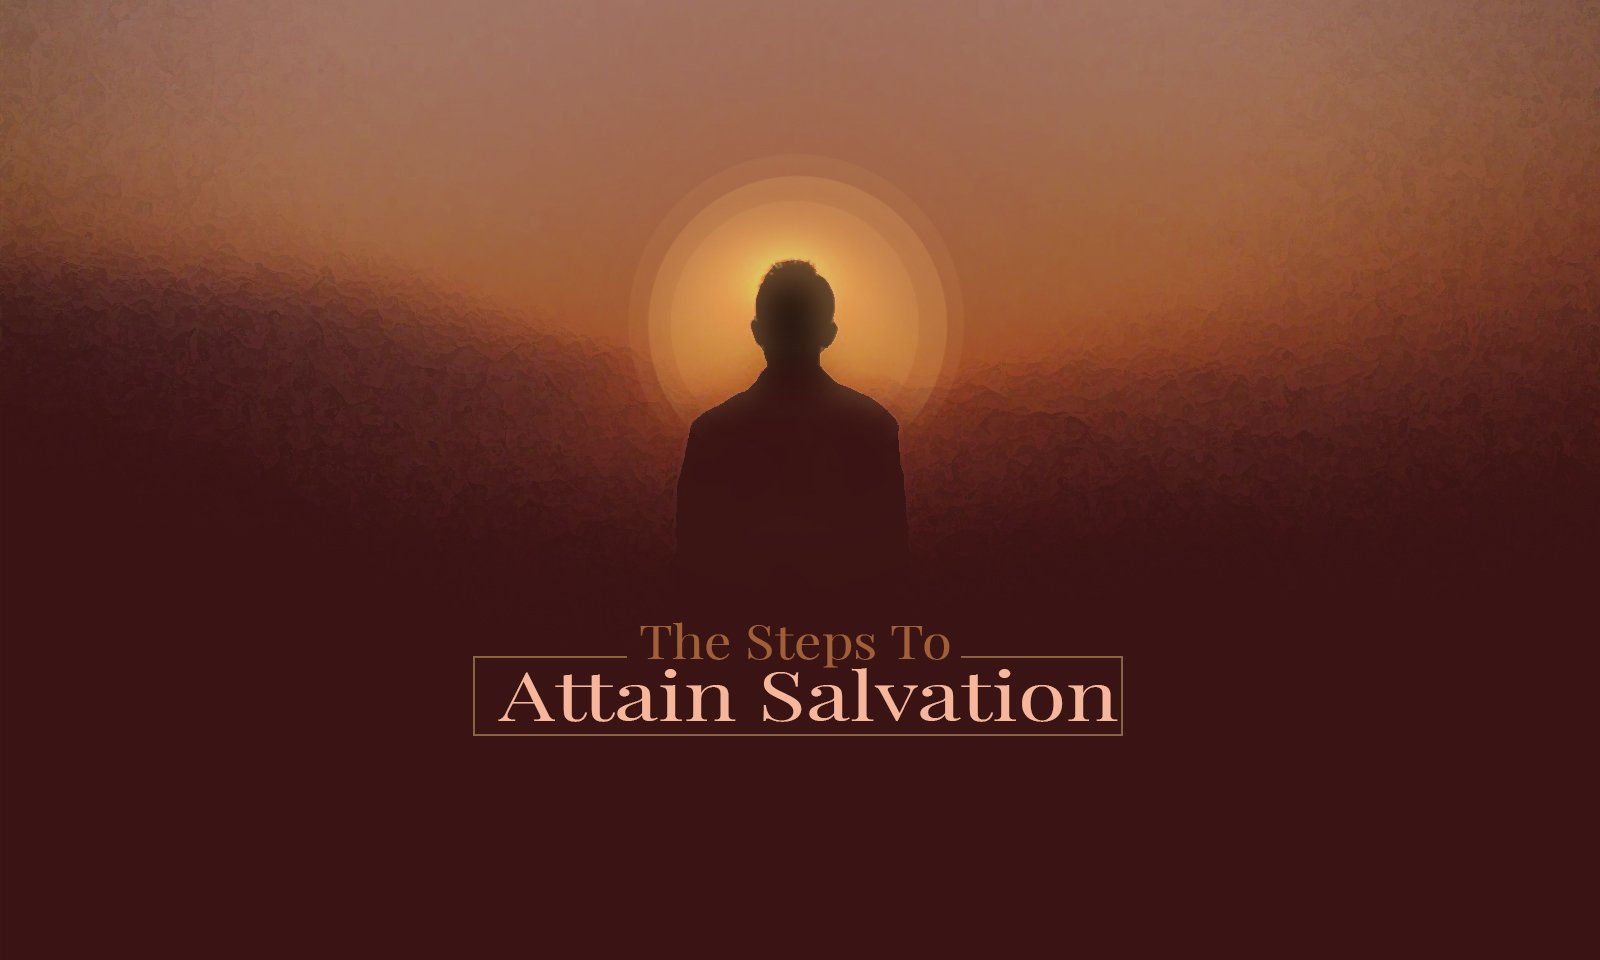 The Steps To Attain Salvation